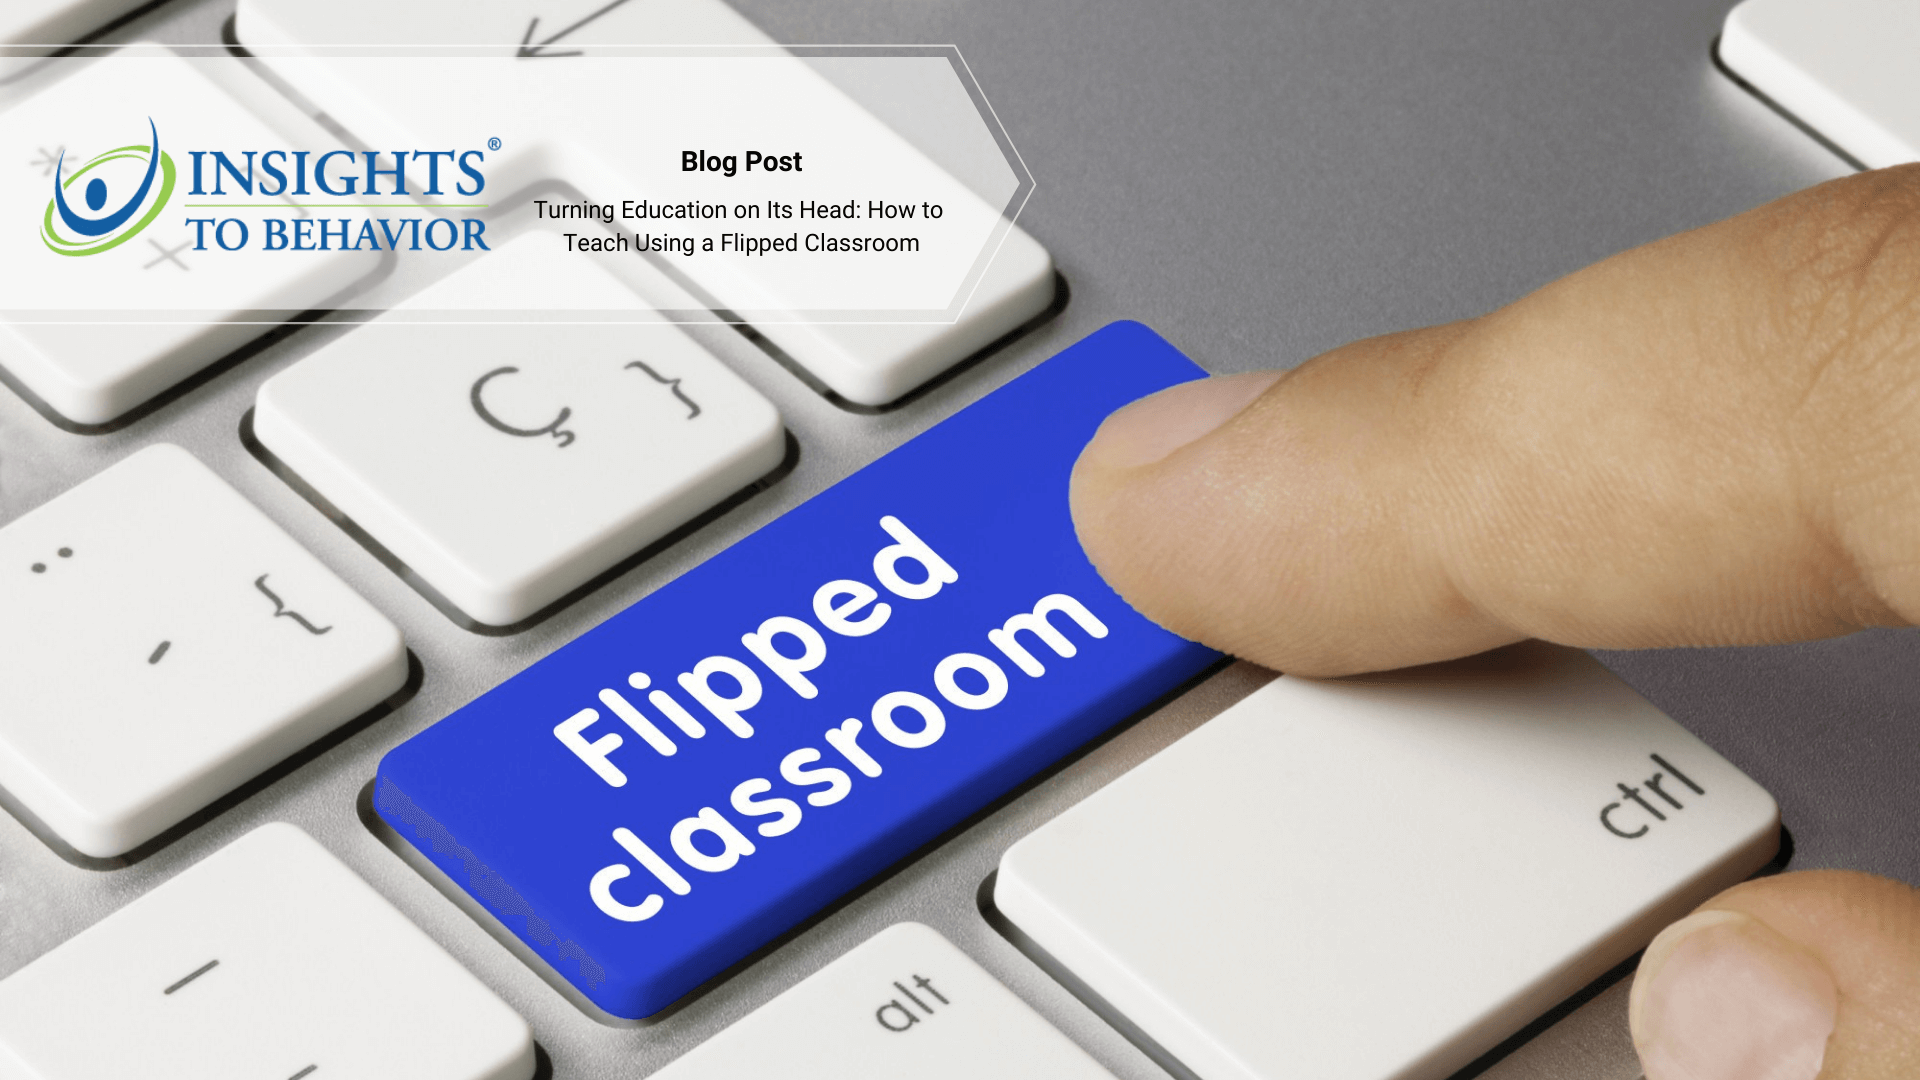 Turning Education on Its Head: How to Teach Using a Flipped Classroom